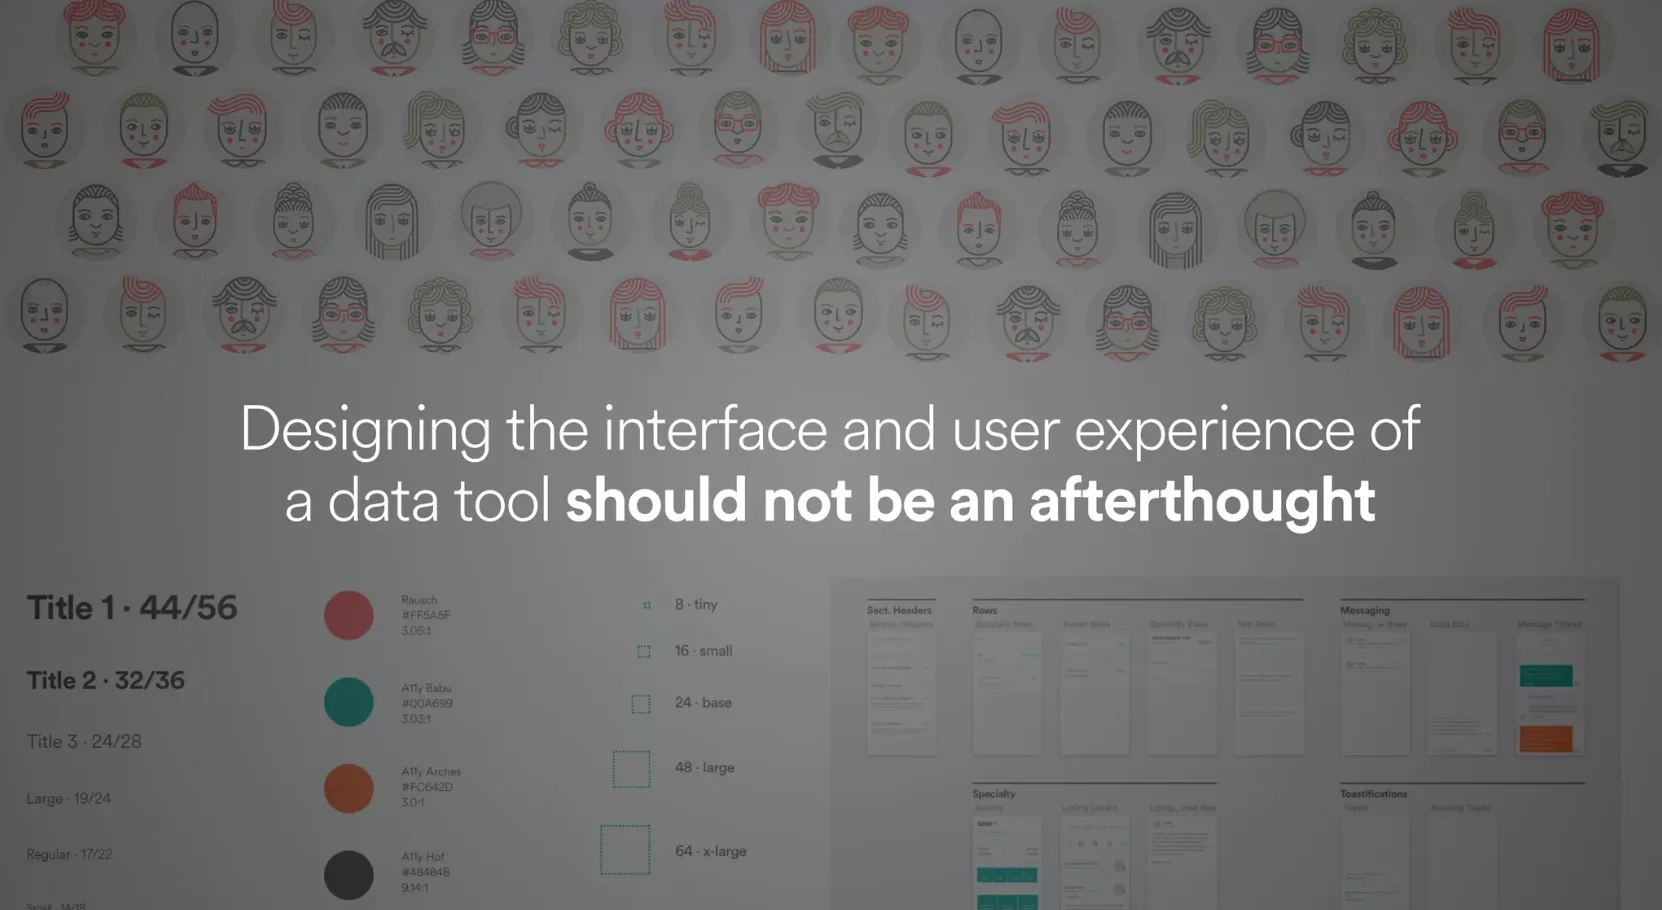 Airbnb on designing user interfaces.